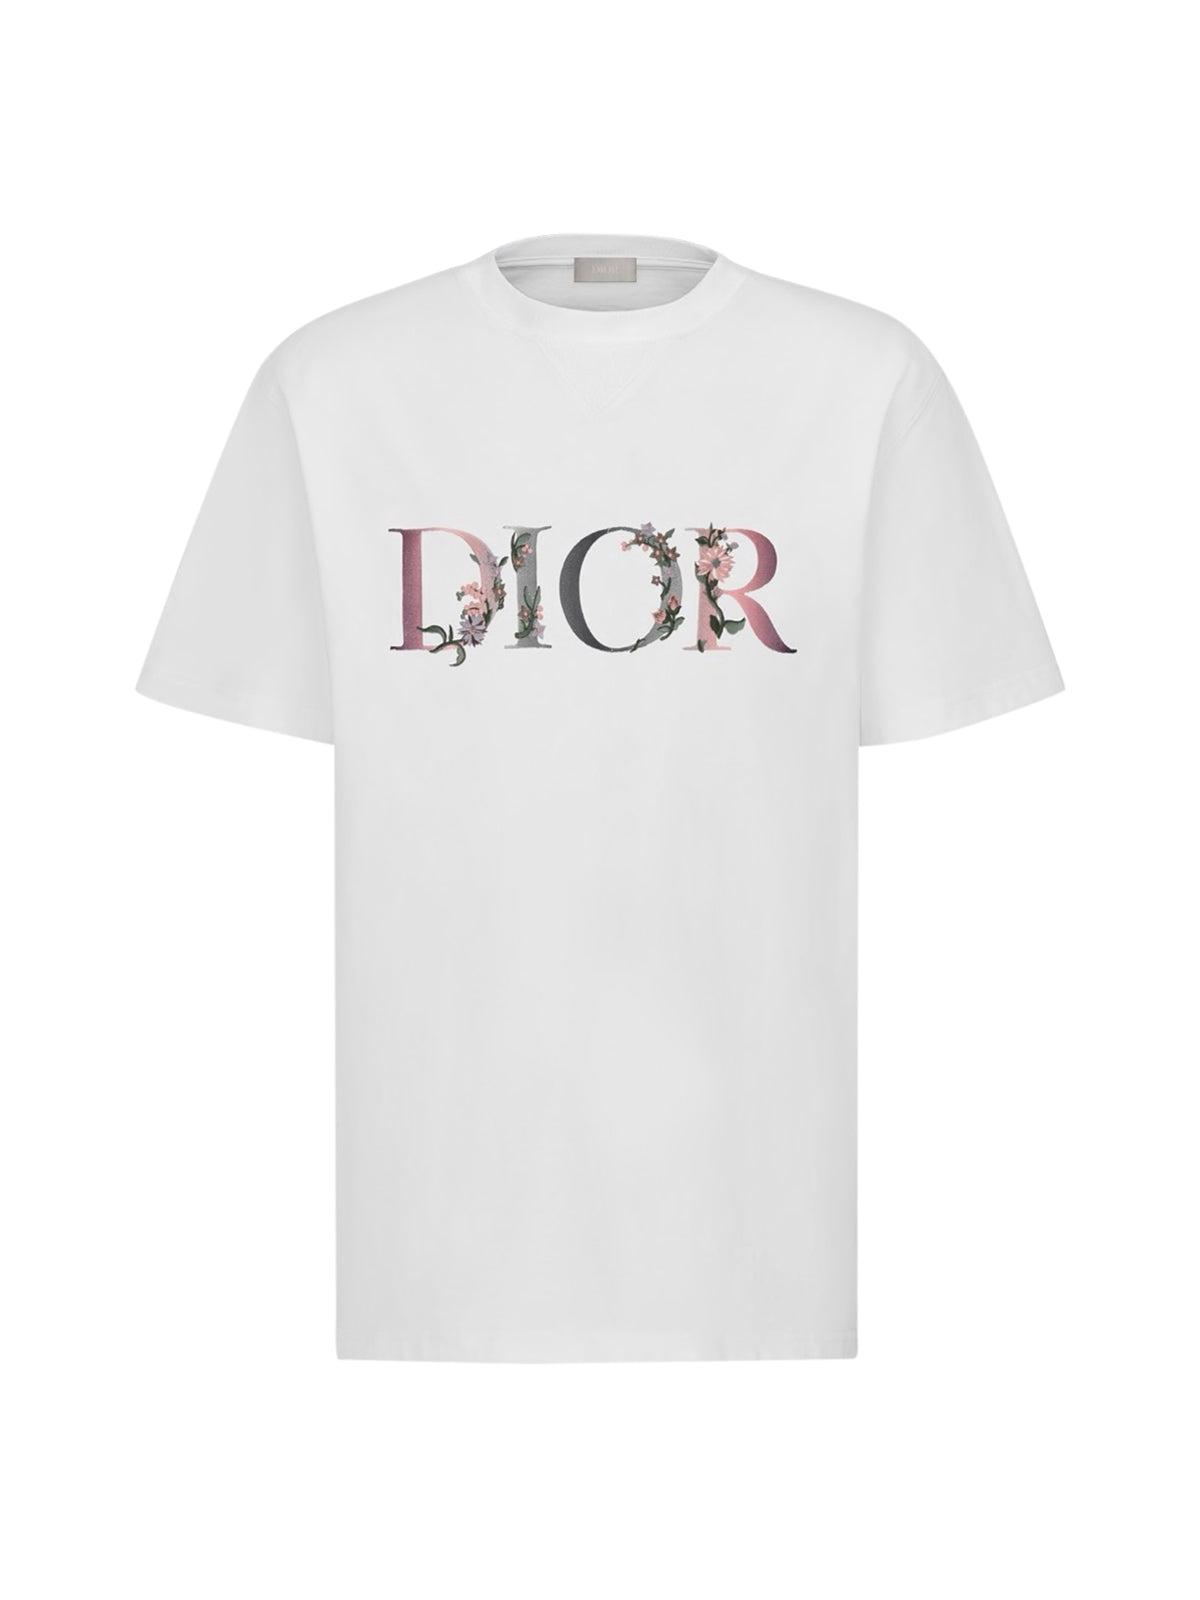 Dior T-shirt Dior Flowers Oversize in White for Men | Lyst